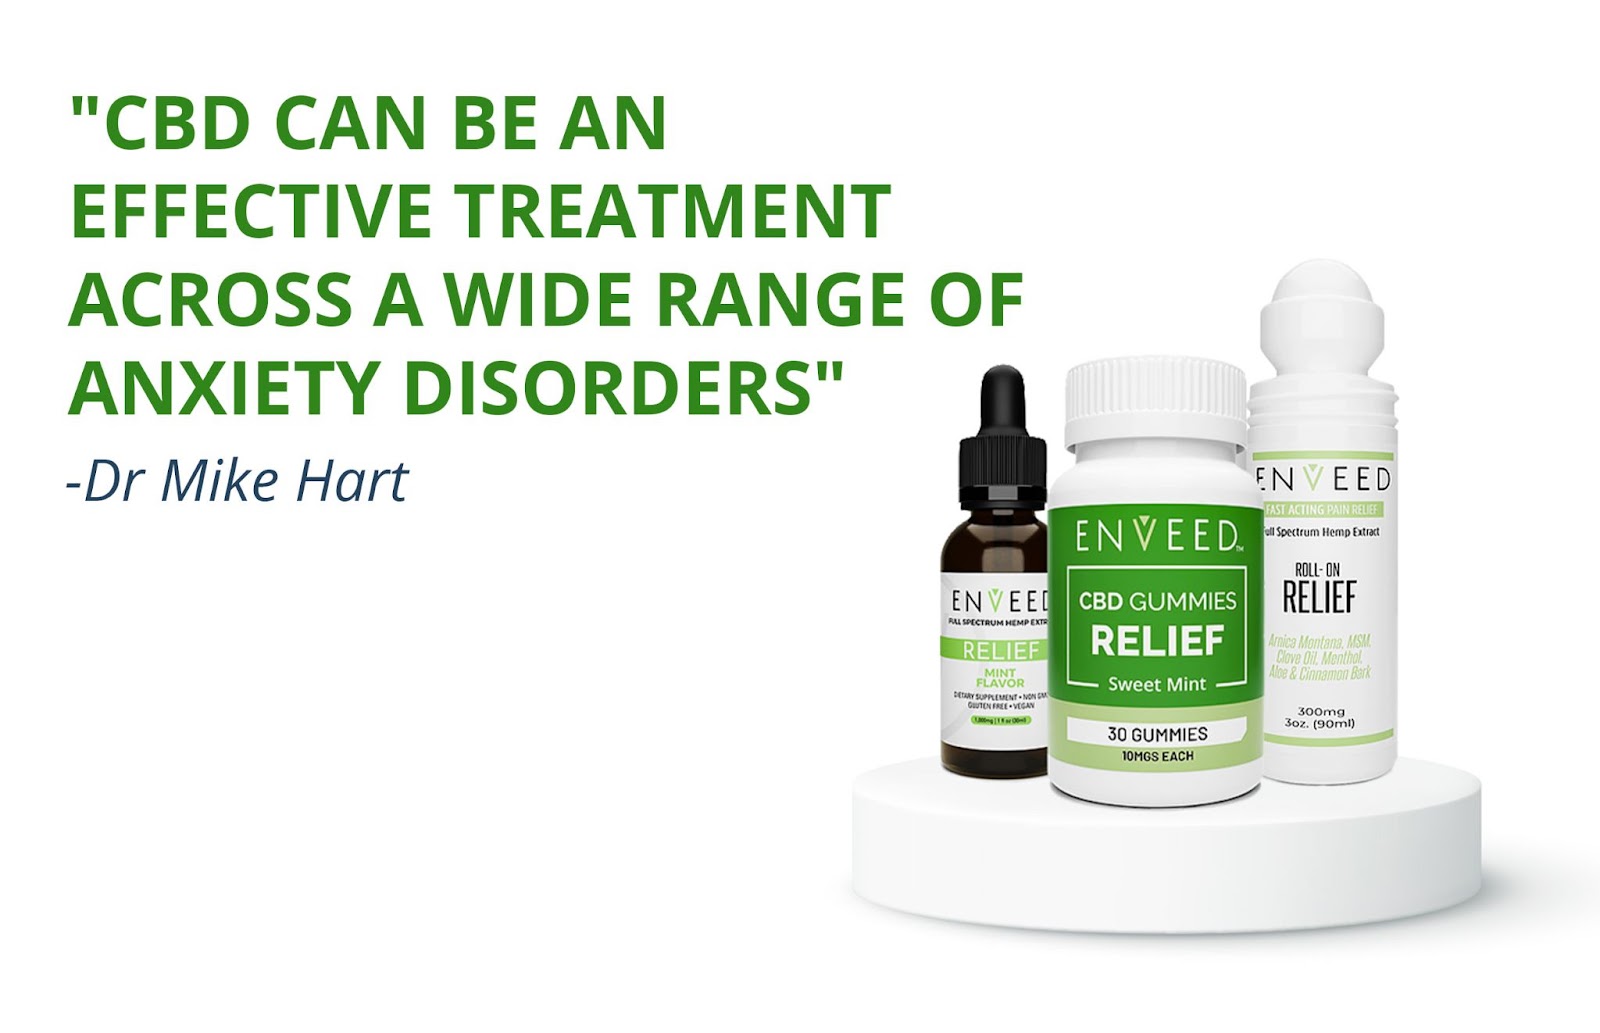 CBD can be an effective treatment across a wide range of anxiety disorders